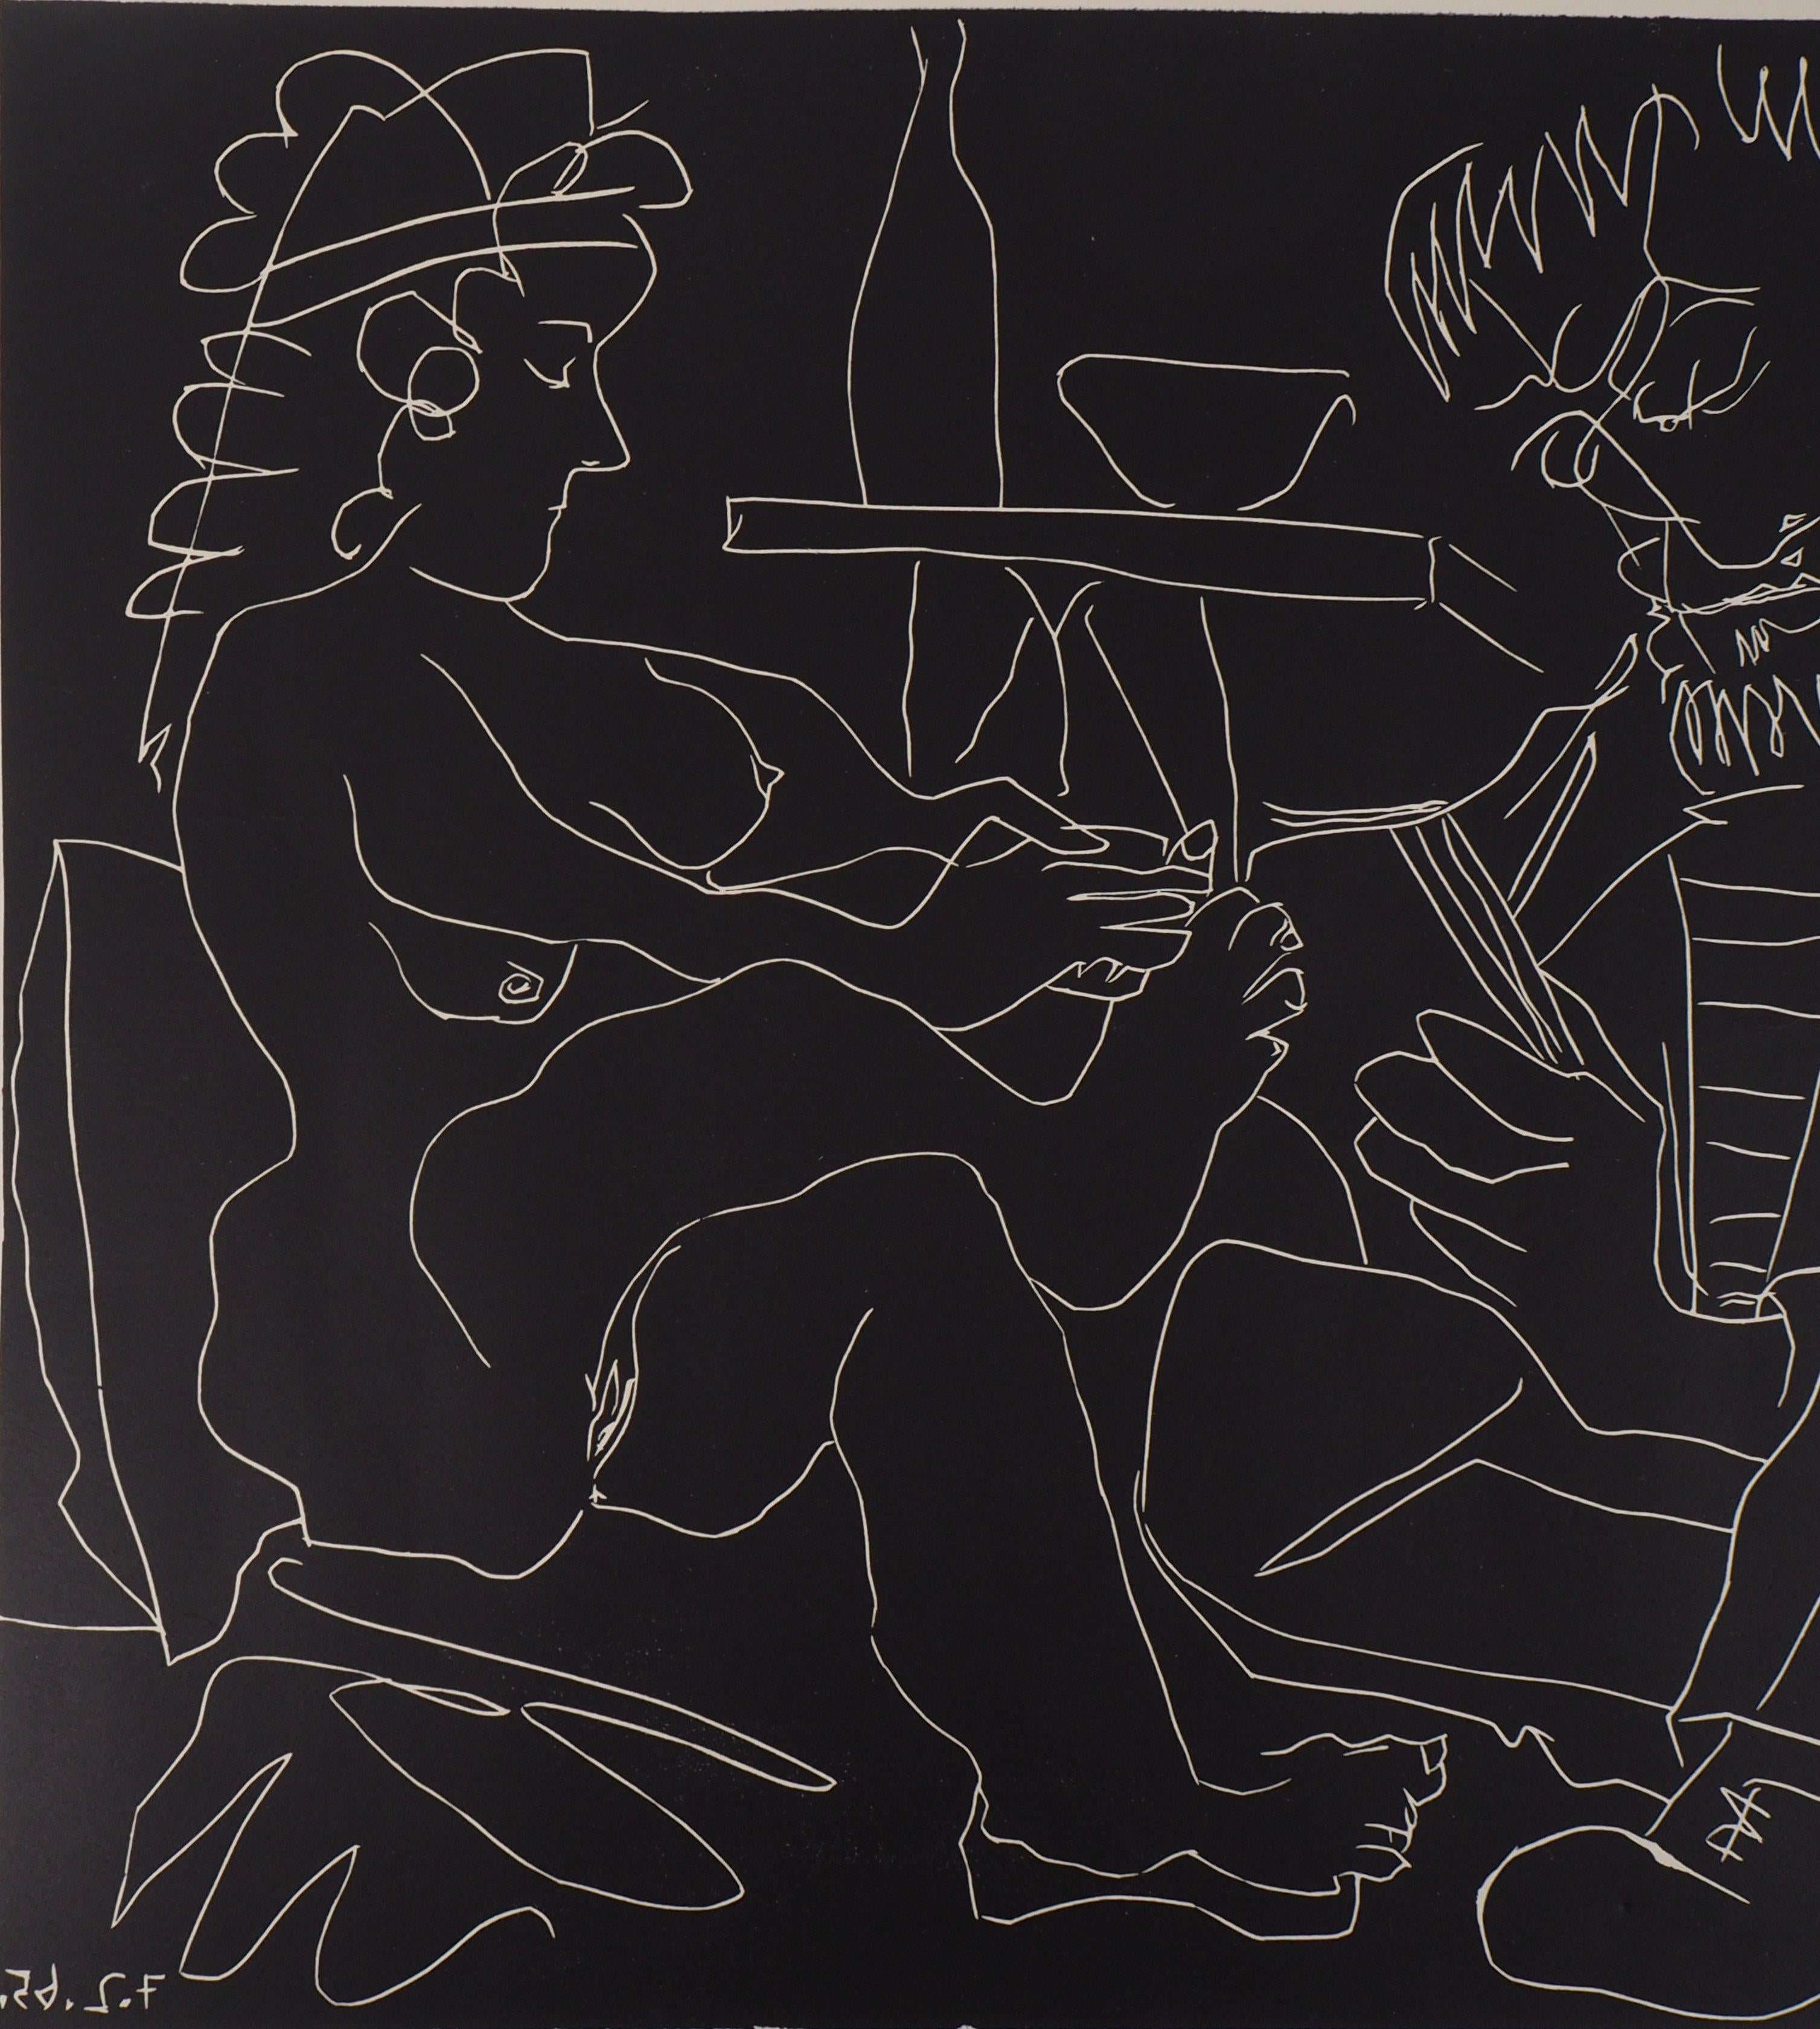 Painter and Model with Hat - Original linocut, Handsigned (ref. Bloch #1194) 1